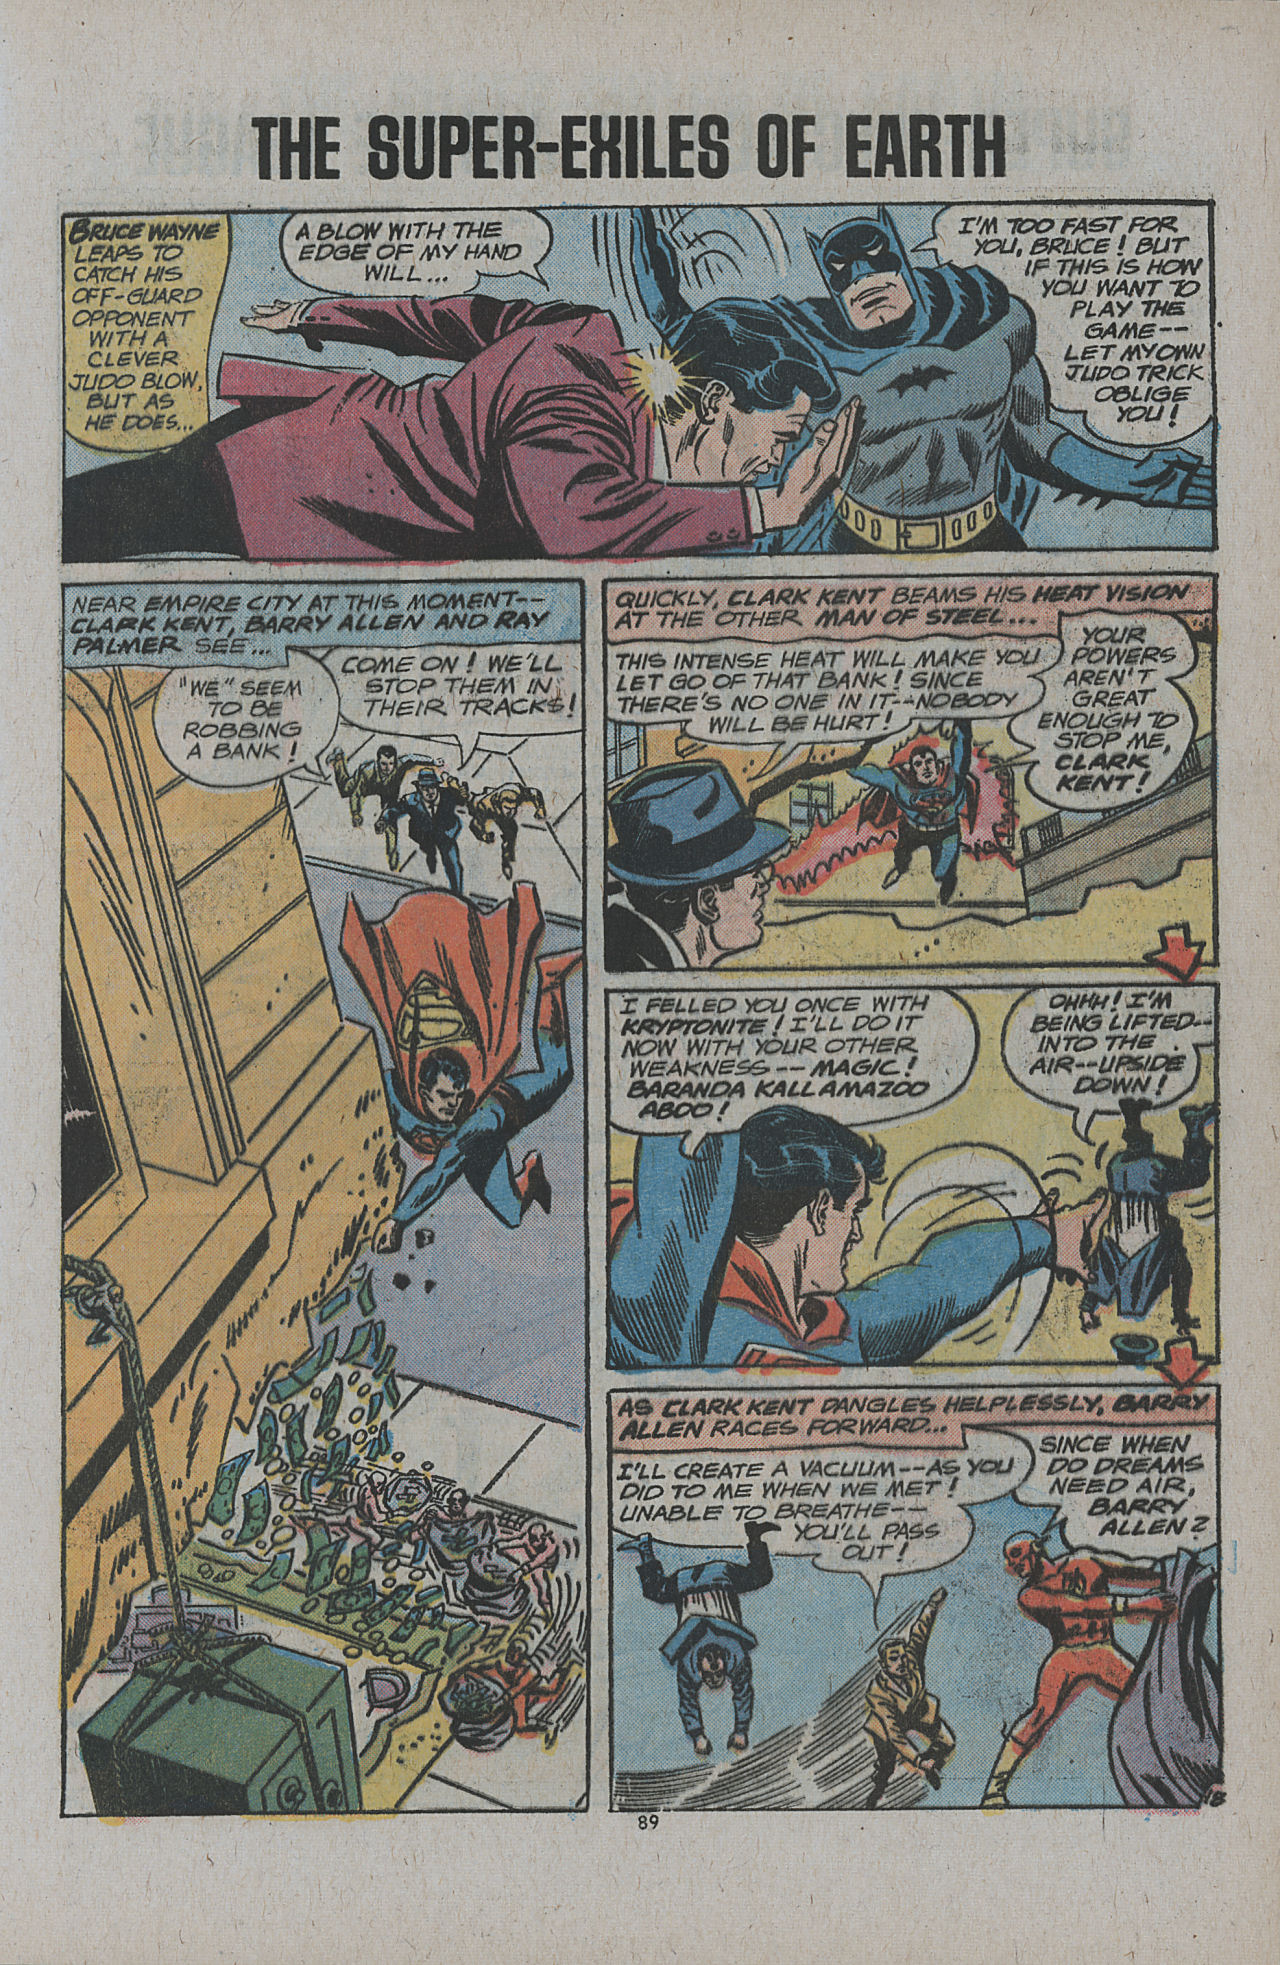 Justice League of America (1960) 112 Page 87